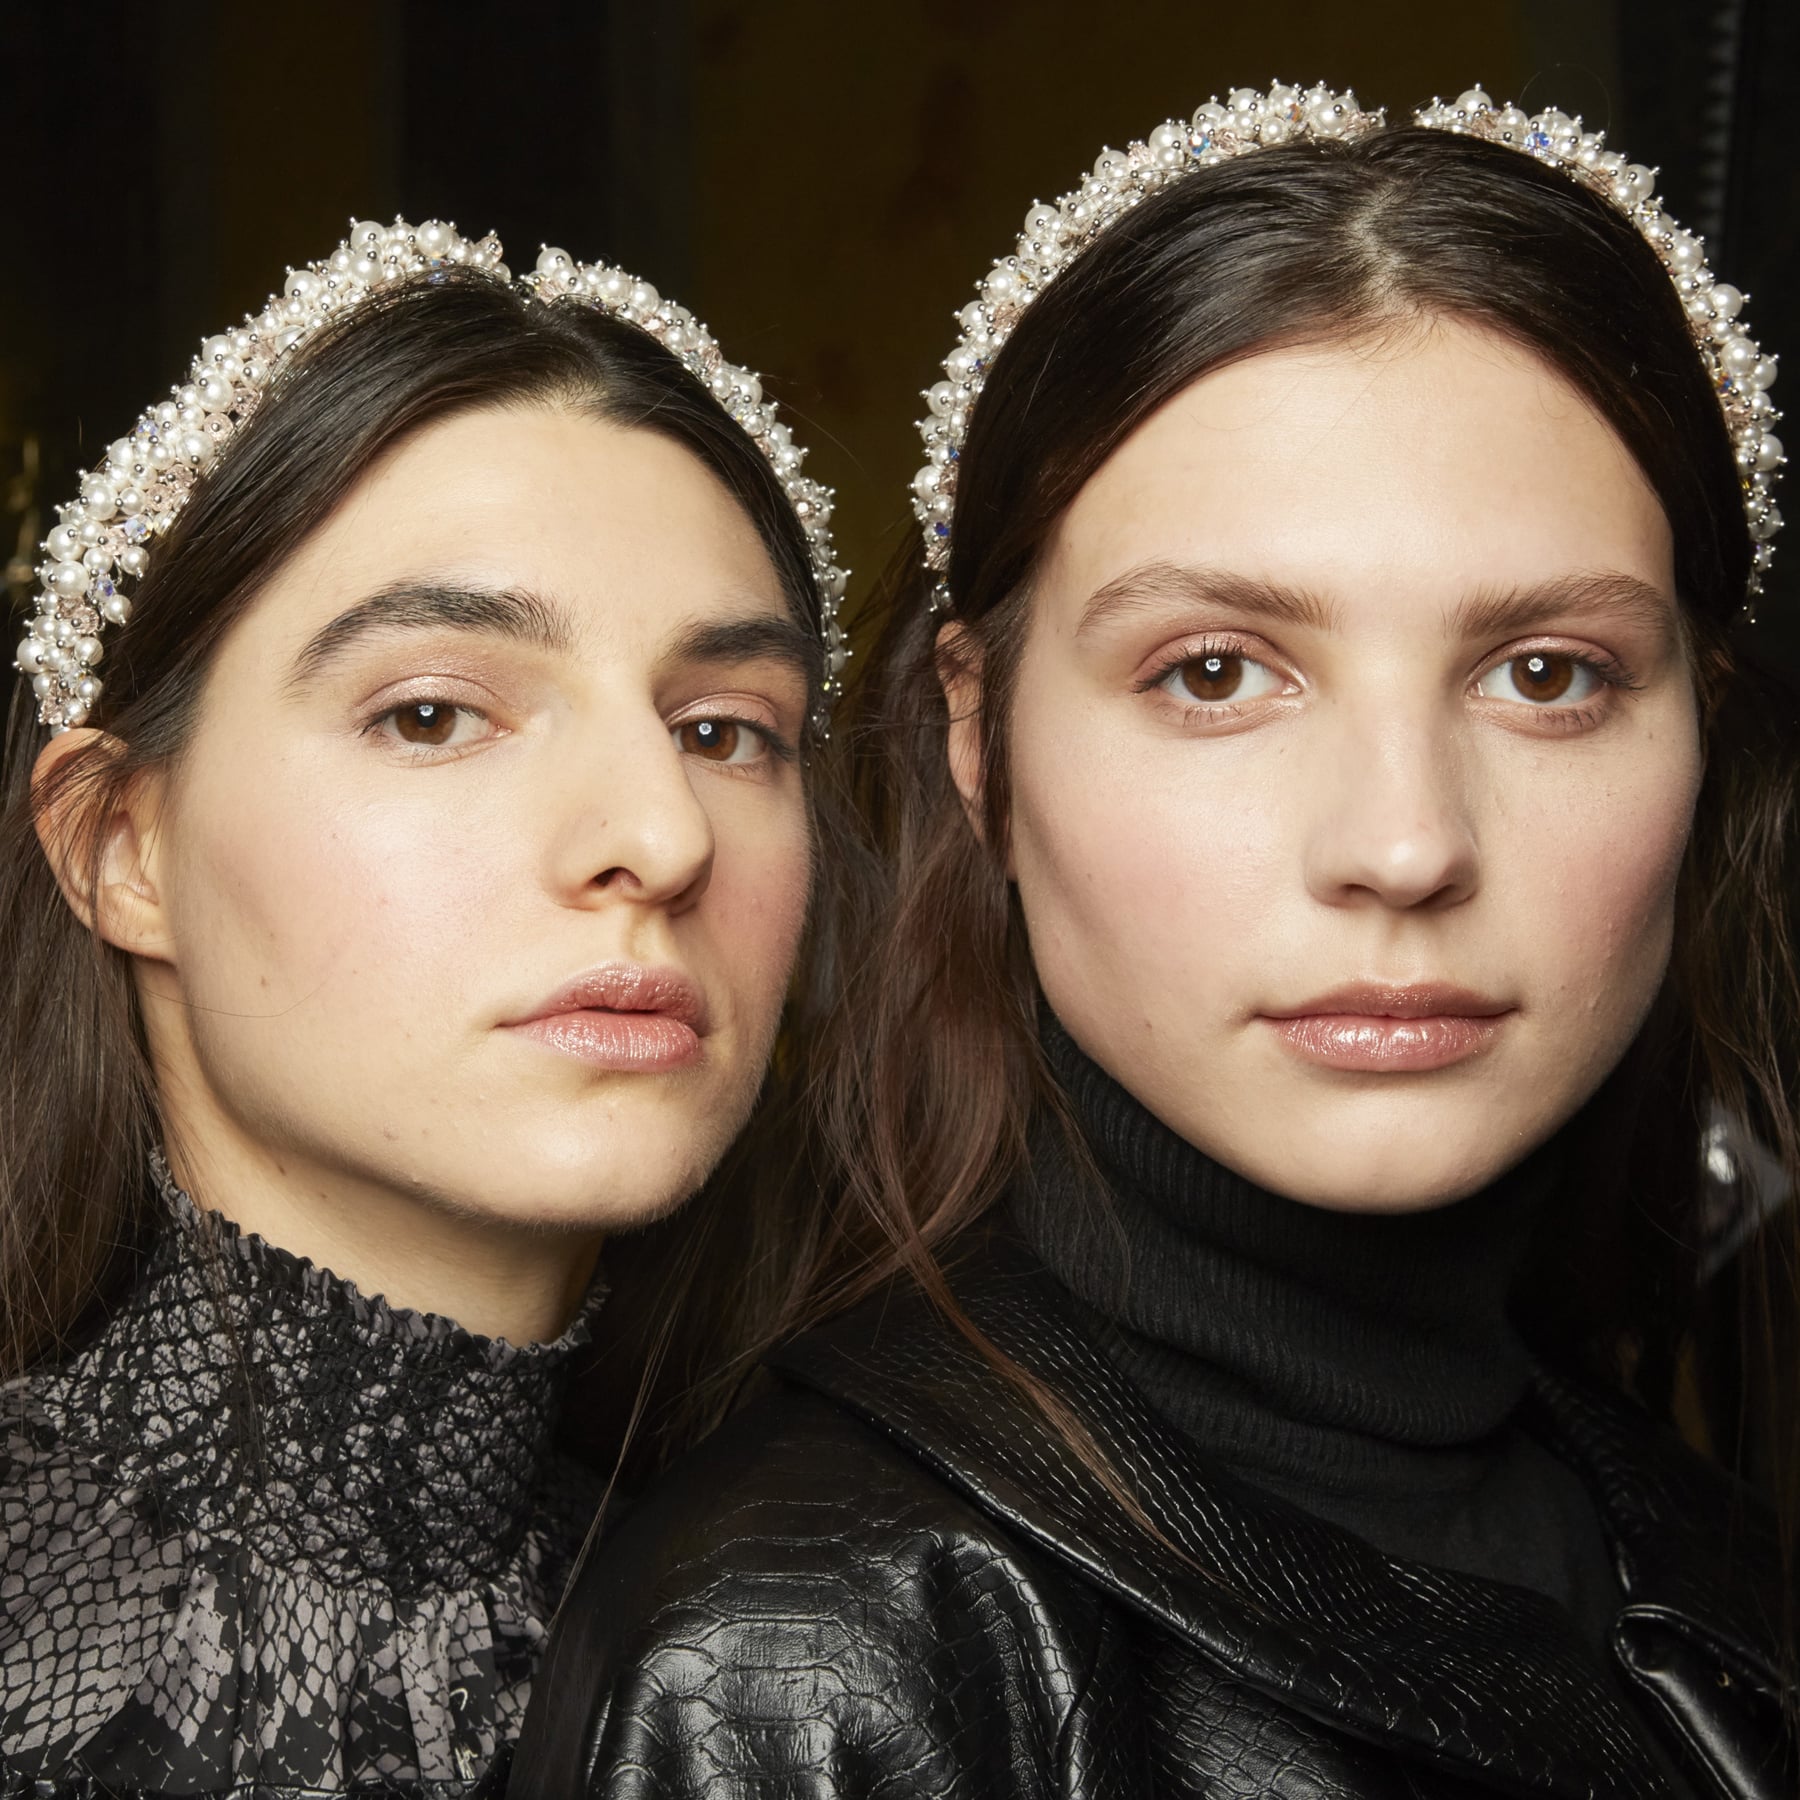 The Hair Accessories Trends For Autumn 2019 | POPSUGAR Beauty UK